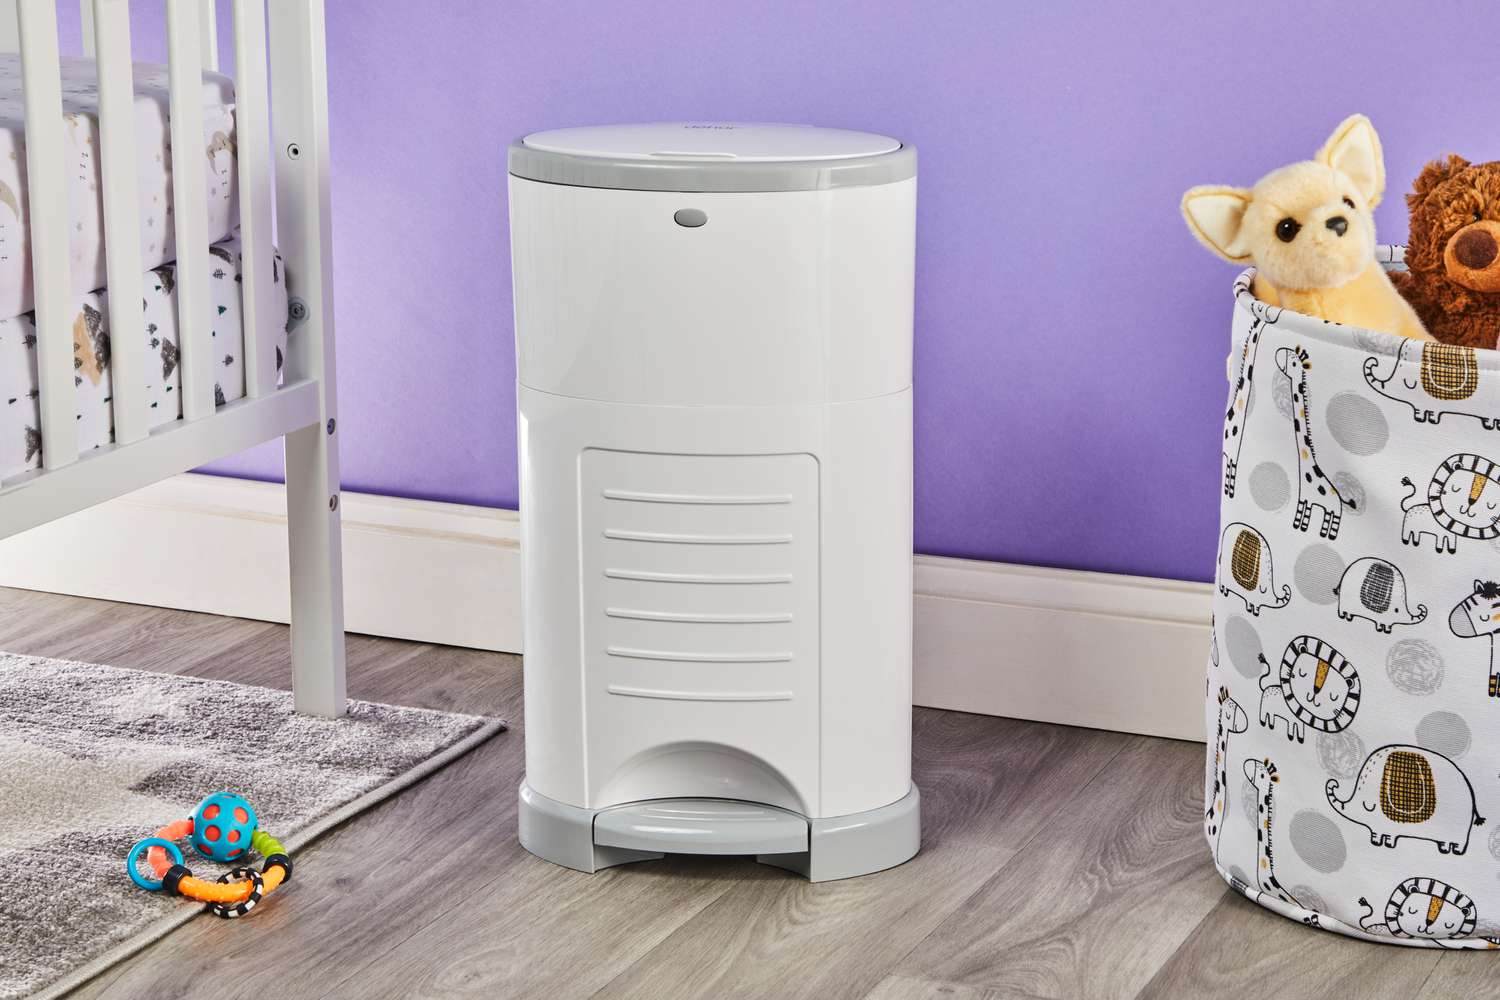 Diaper Pail Review: The Best Options for Odor-Free Disposal